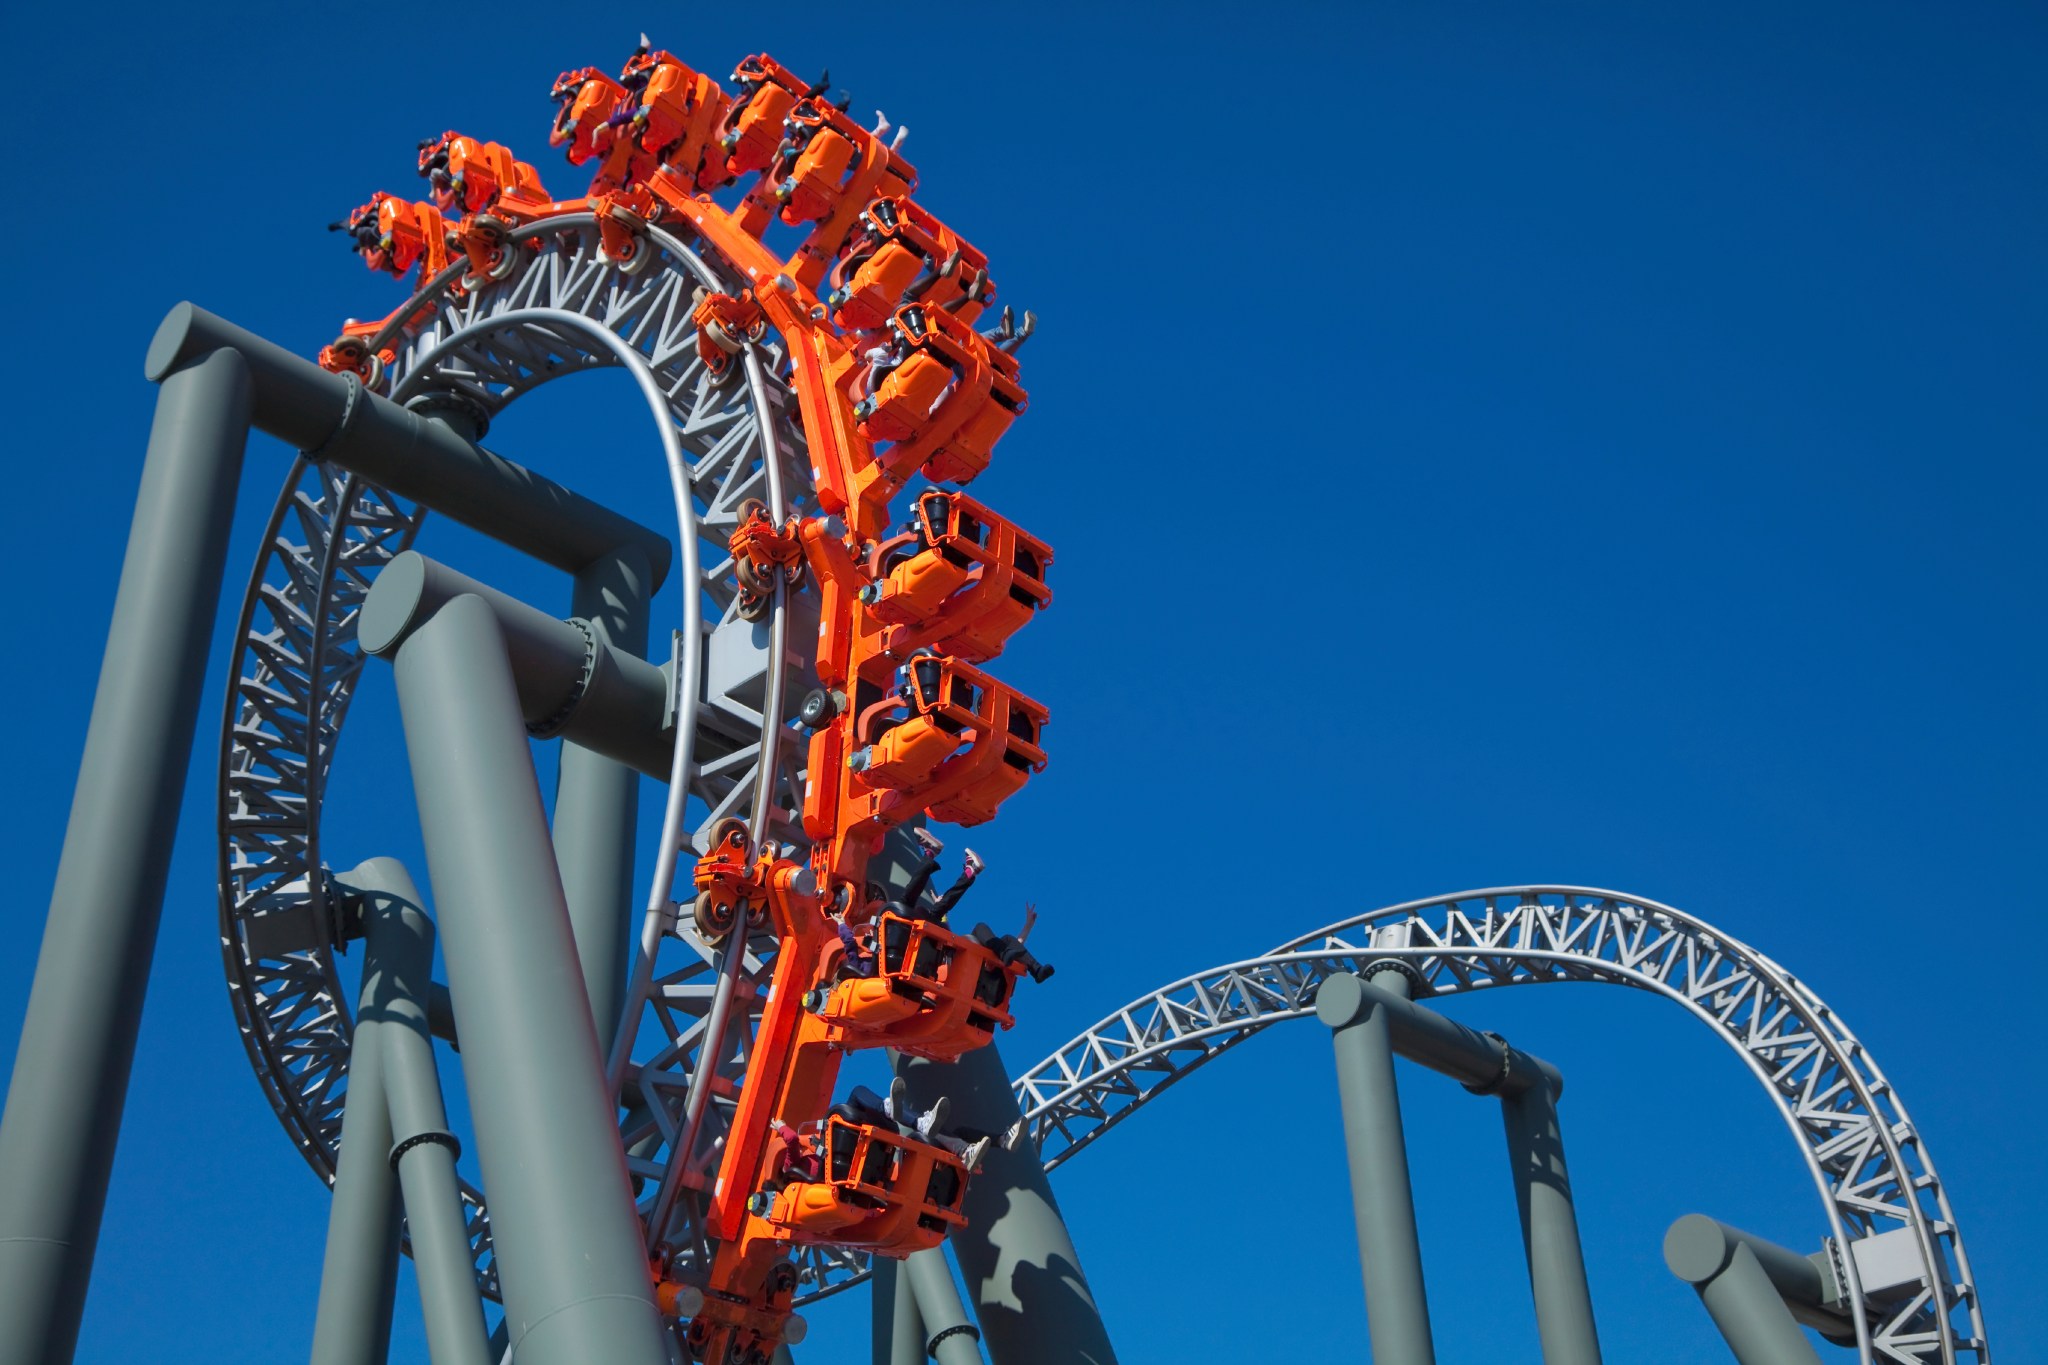 NASTRAN technology is used to design roller coasters